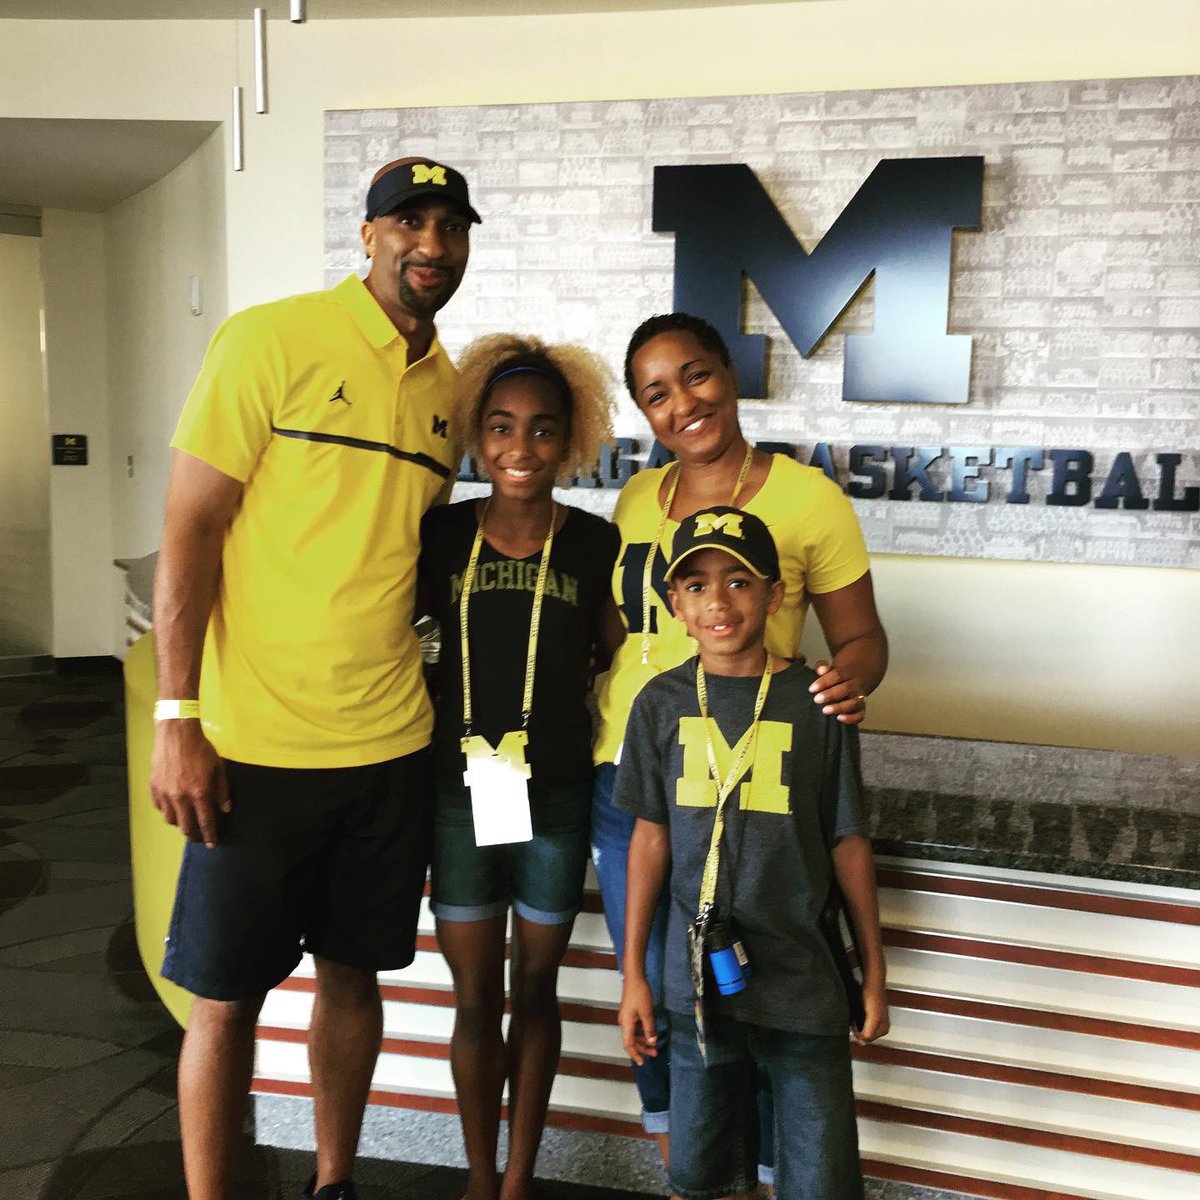 We @channonnichole @SidWashington23 @CalebJamesWash1 are 4ever grateful to @umichbball @UMichAthletics for all the a-〽️aize-ing friendships, memories, experiences we shared! We’re excited to see what God’s next assignment is for the Washingtons. Until then…#WatchHimWork🙏🏽